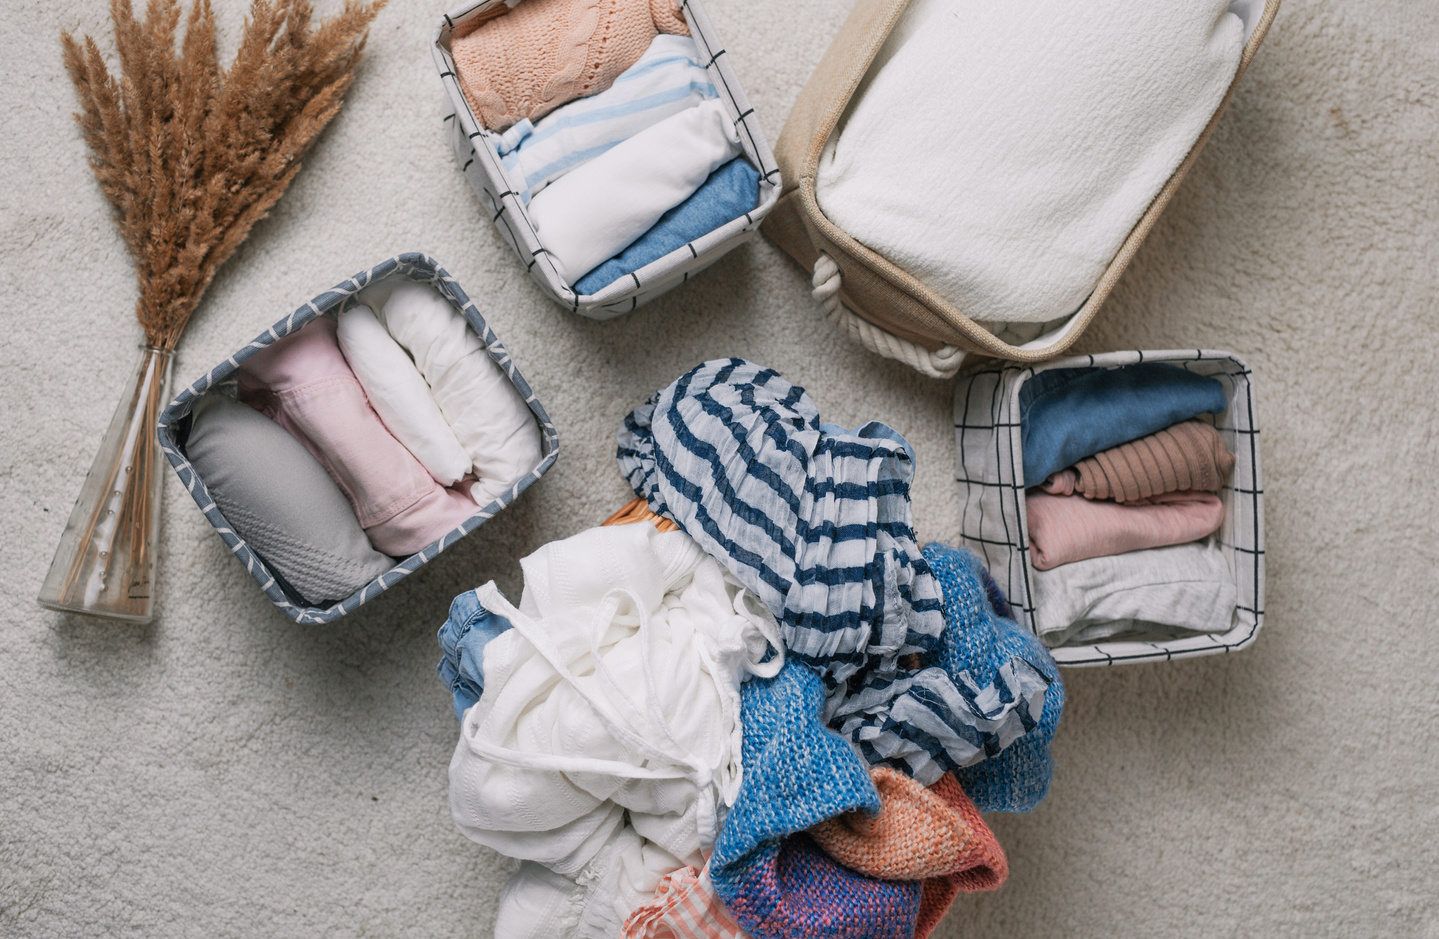 Neatly Folded Clothes in Open Organizer Boxes